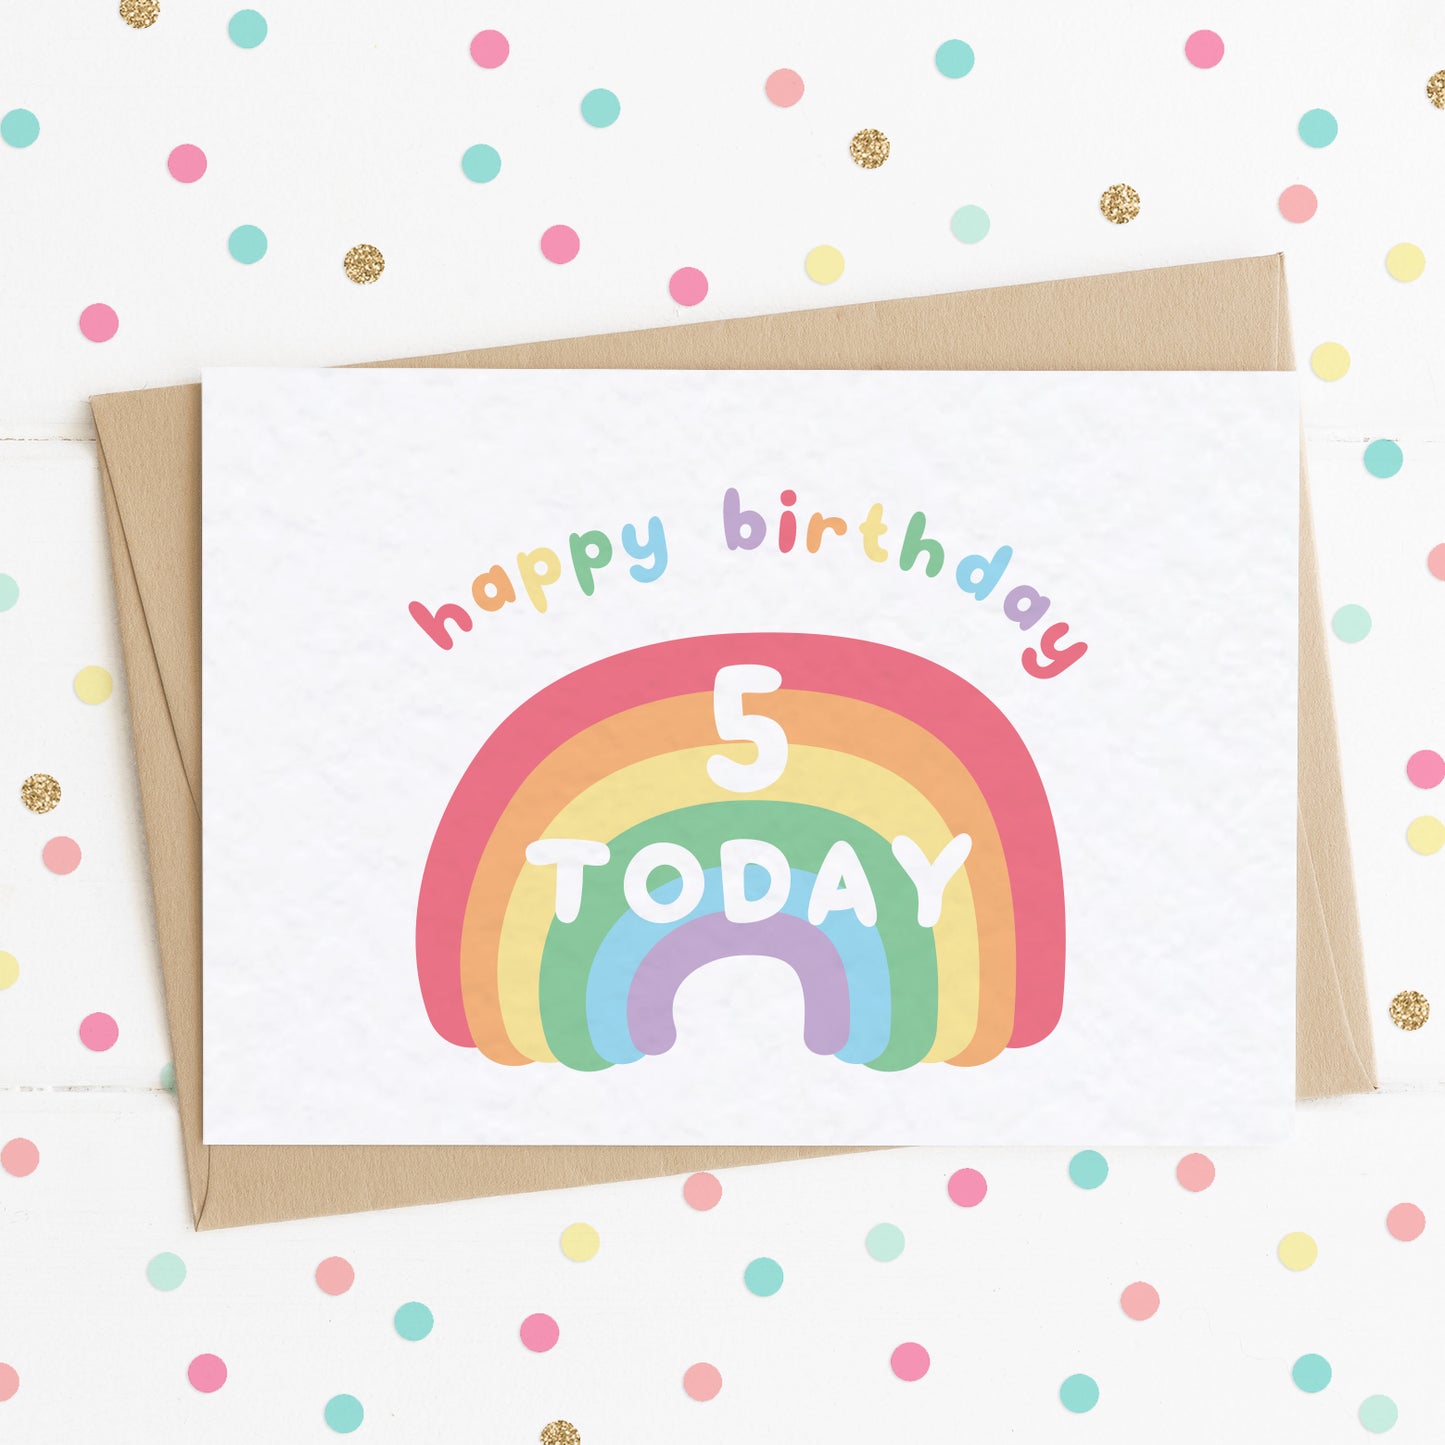 A cute milestone age birthday card with a smiling happy rainbow on it and the message "HAPPY BIRTHDAY - 5 TODAY".